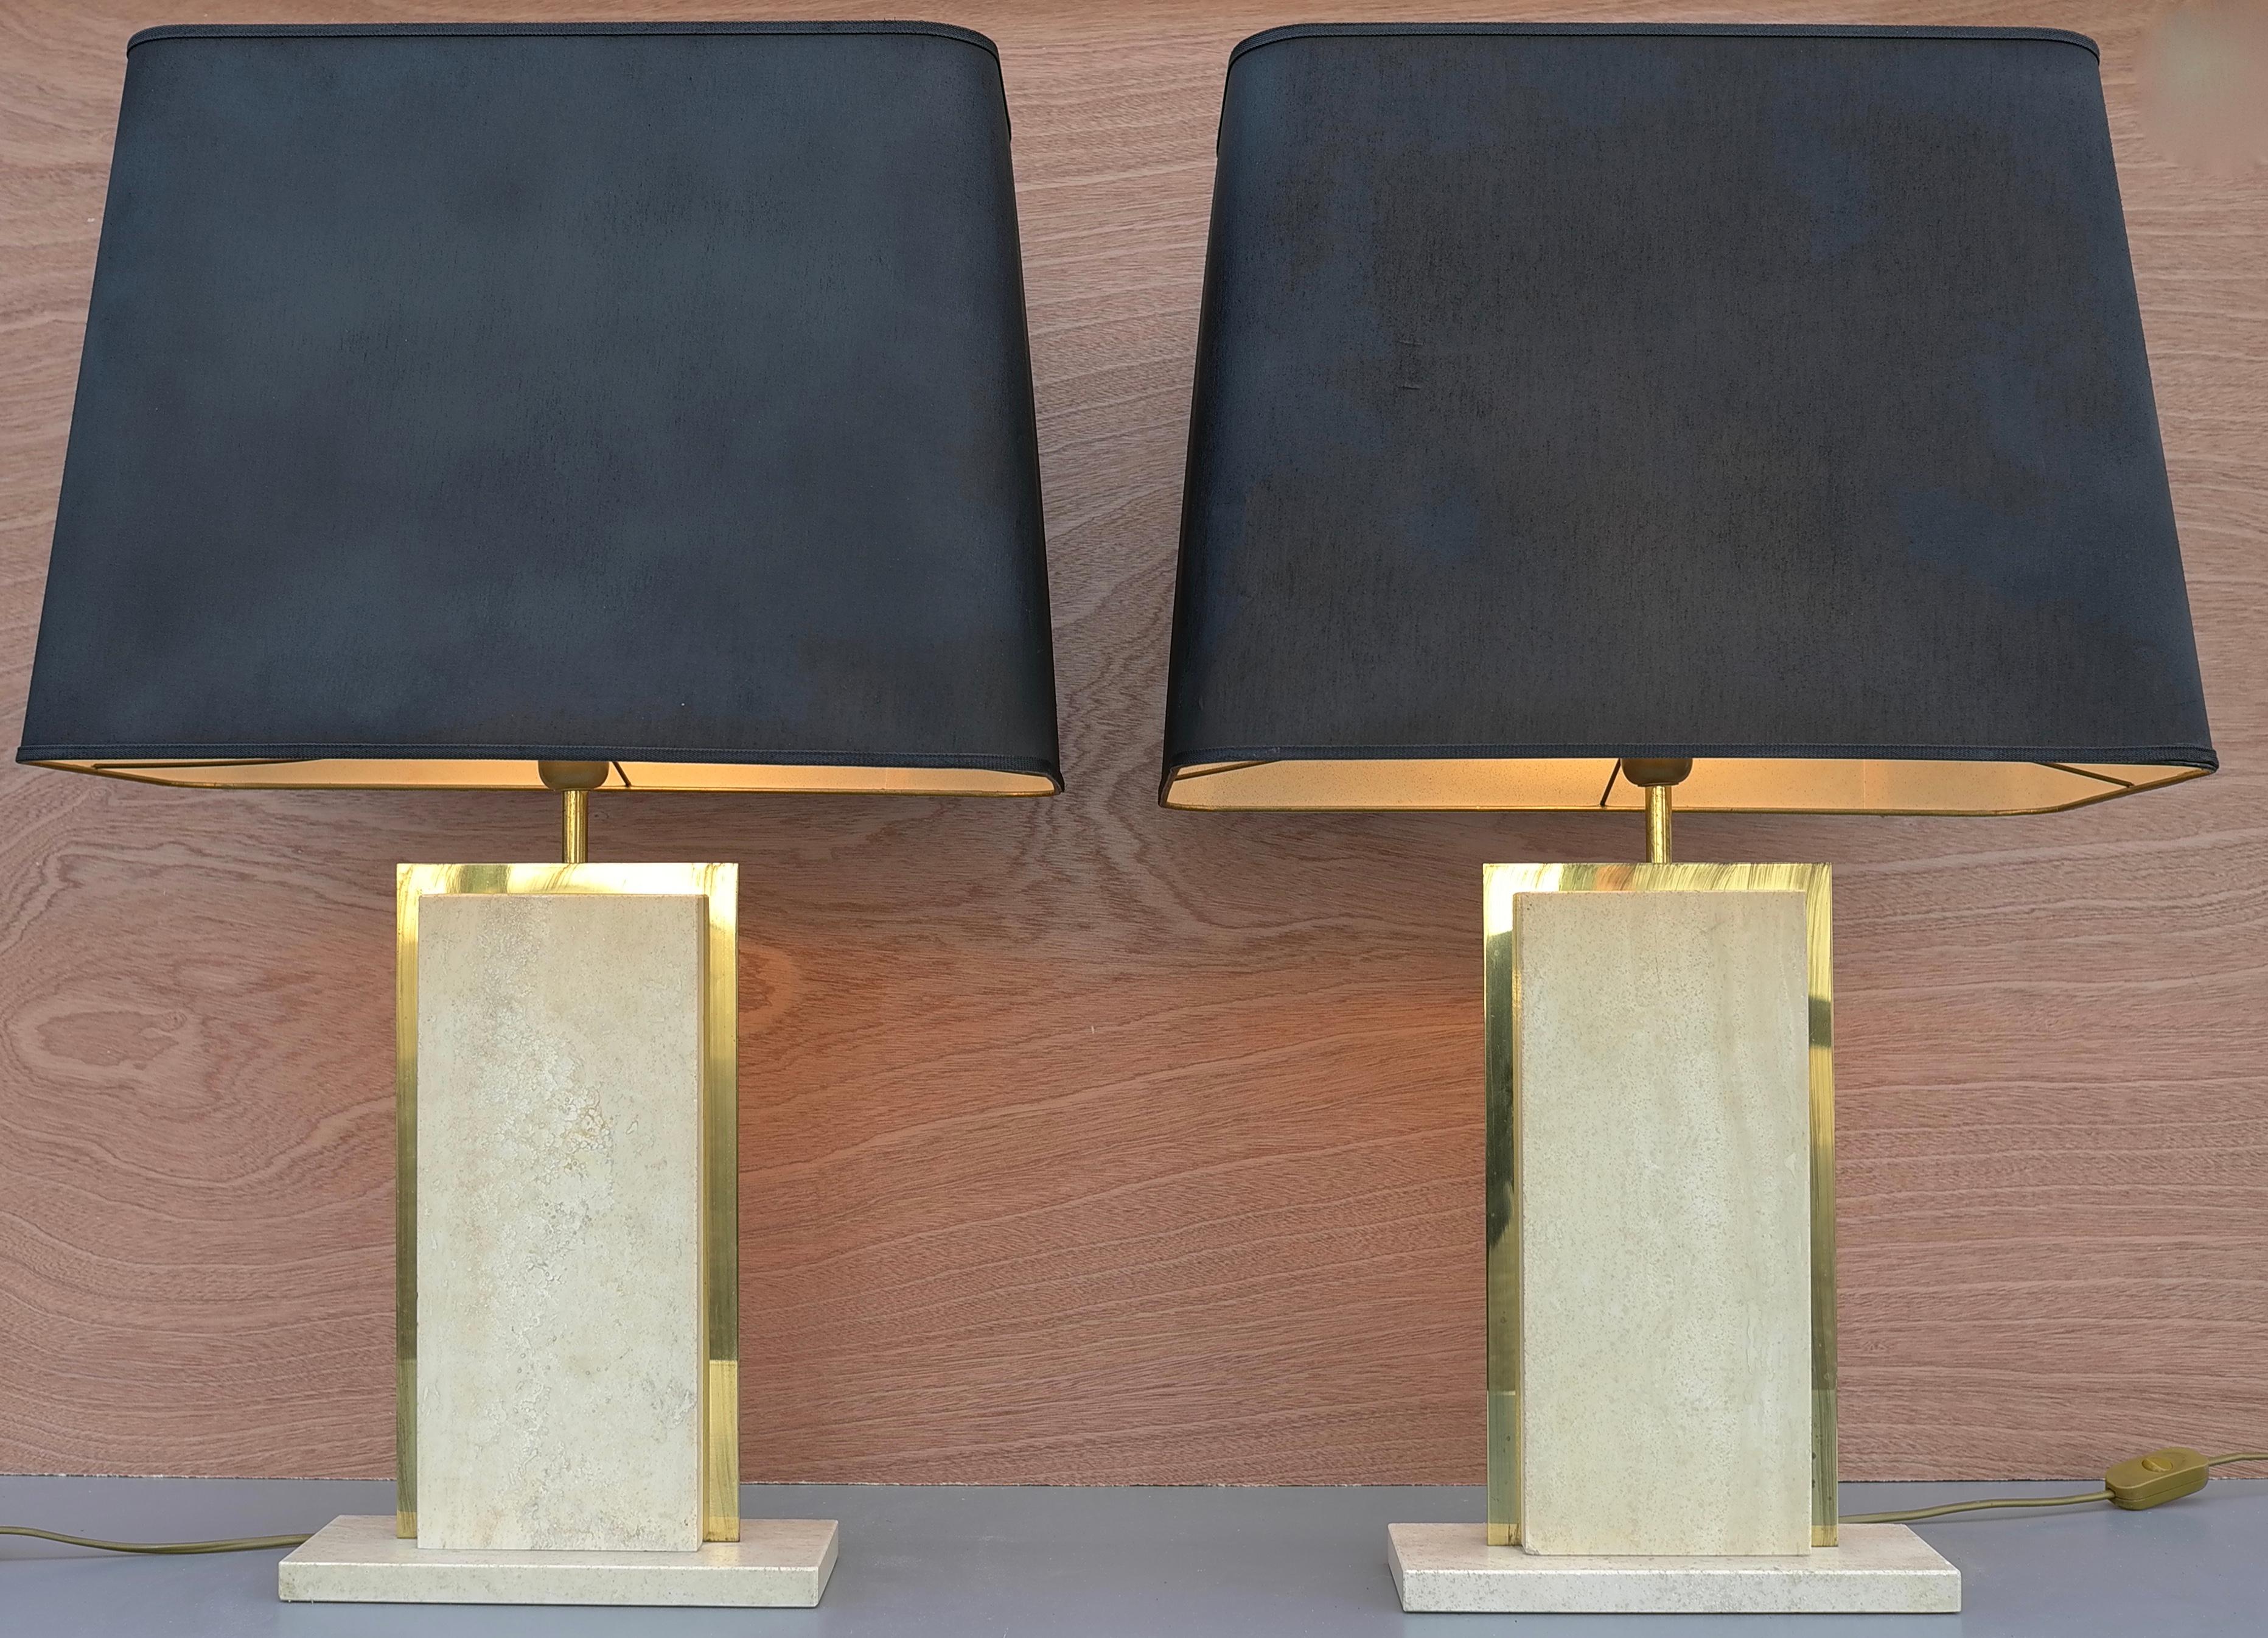 Belgian Travertine and Brass Sculptural Mid-Century Modern Table Lamps, Belgium 1970's For Sale